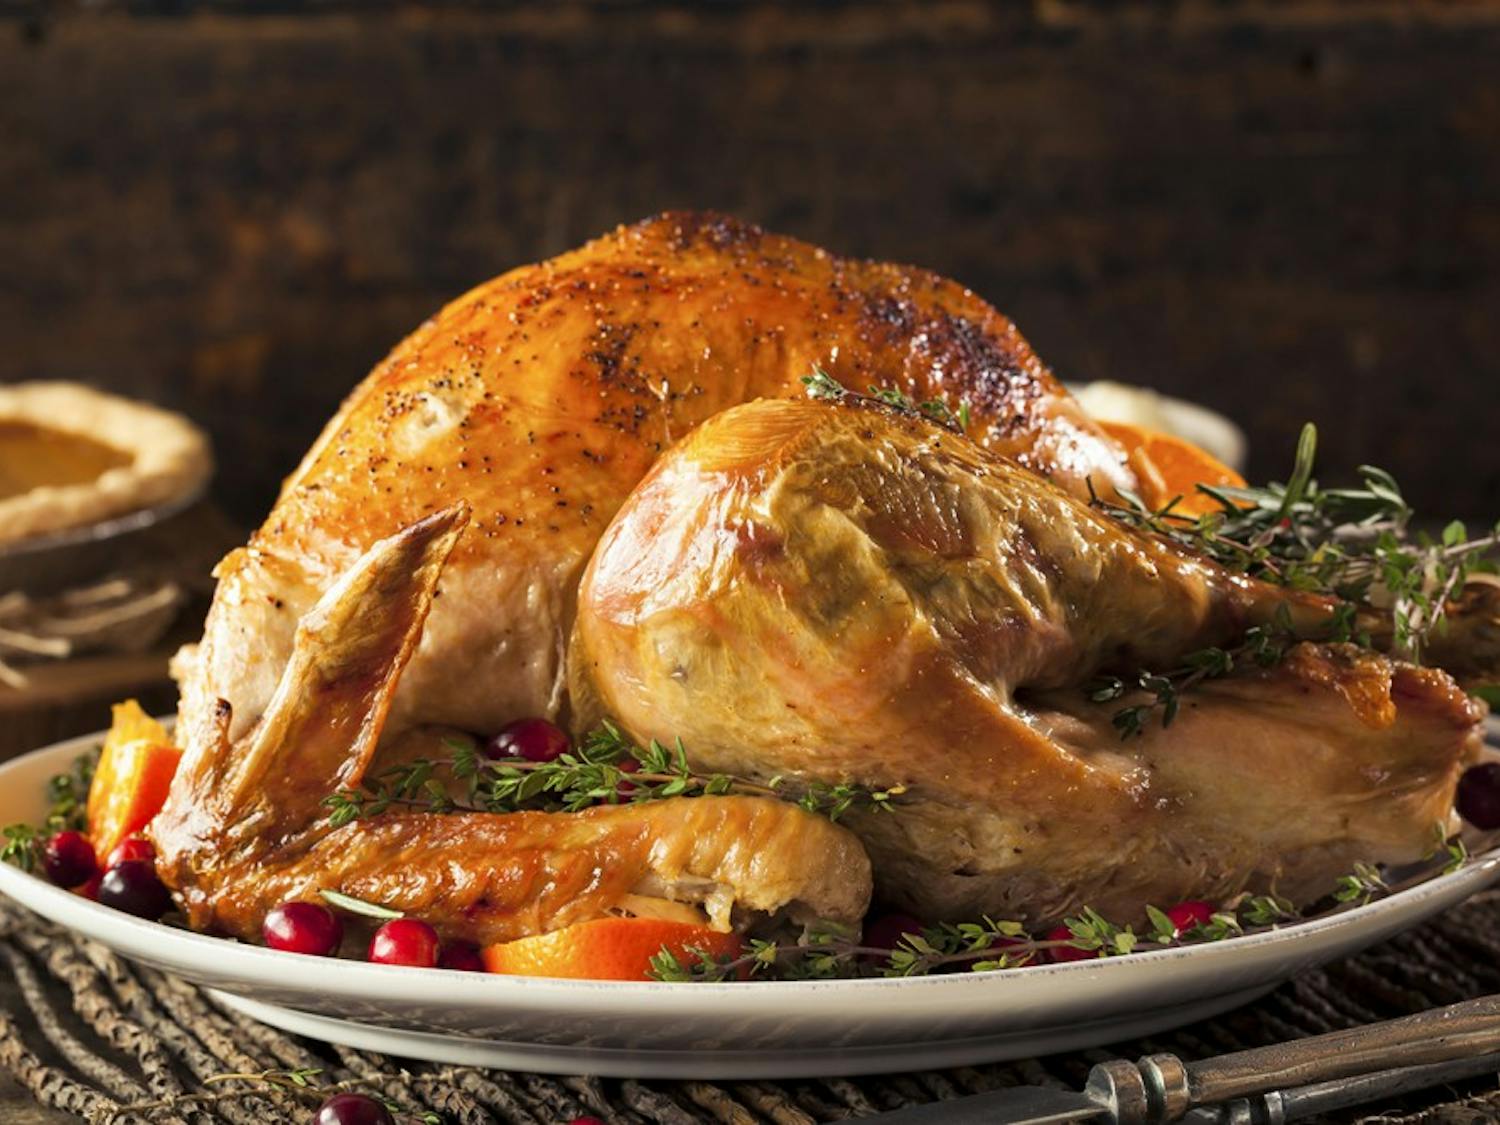 A 15-pound turkey should be enough for 10 people. If your guests prefer more breast meat, buy a larger turkey. They generally have more breast meat. (Dreamstime/TNS)